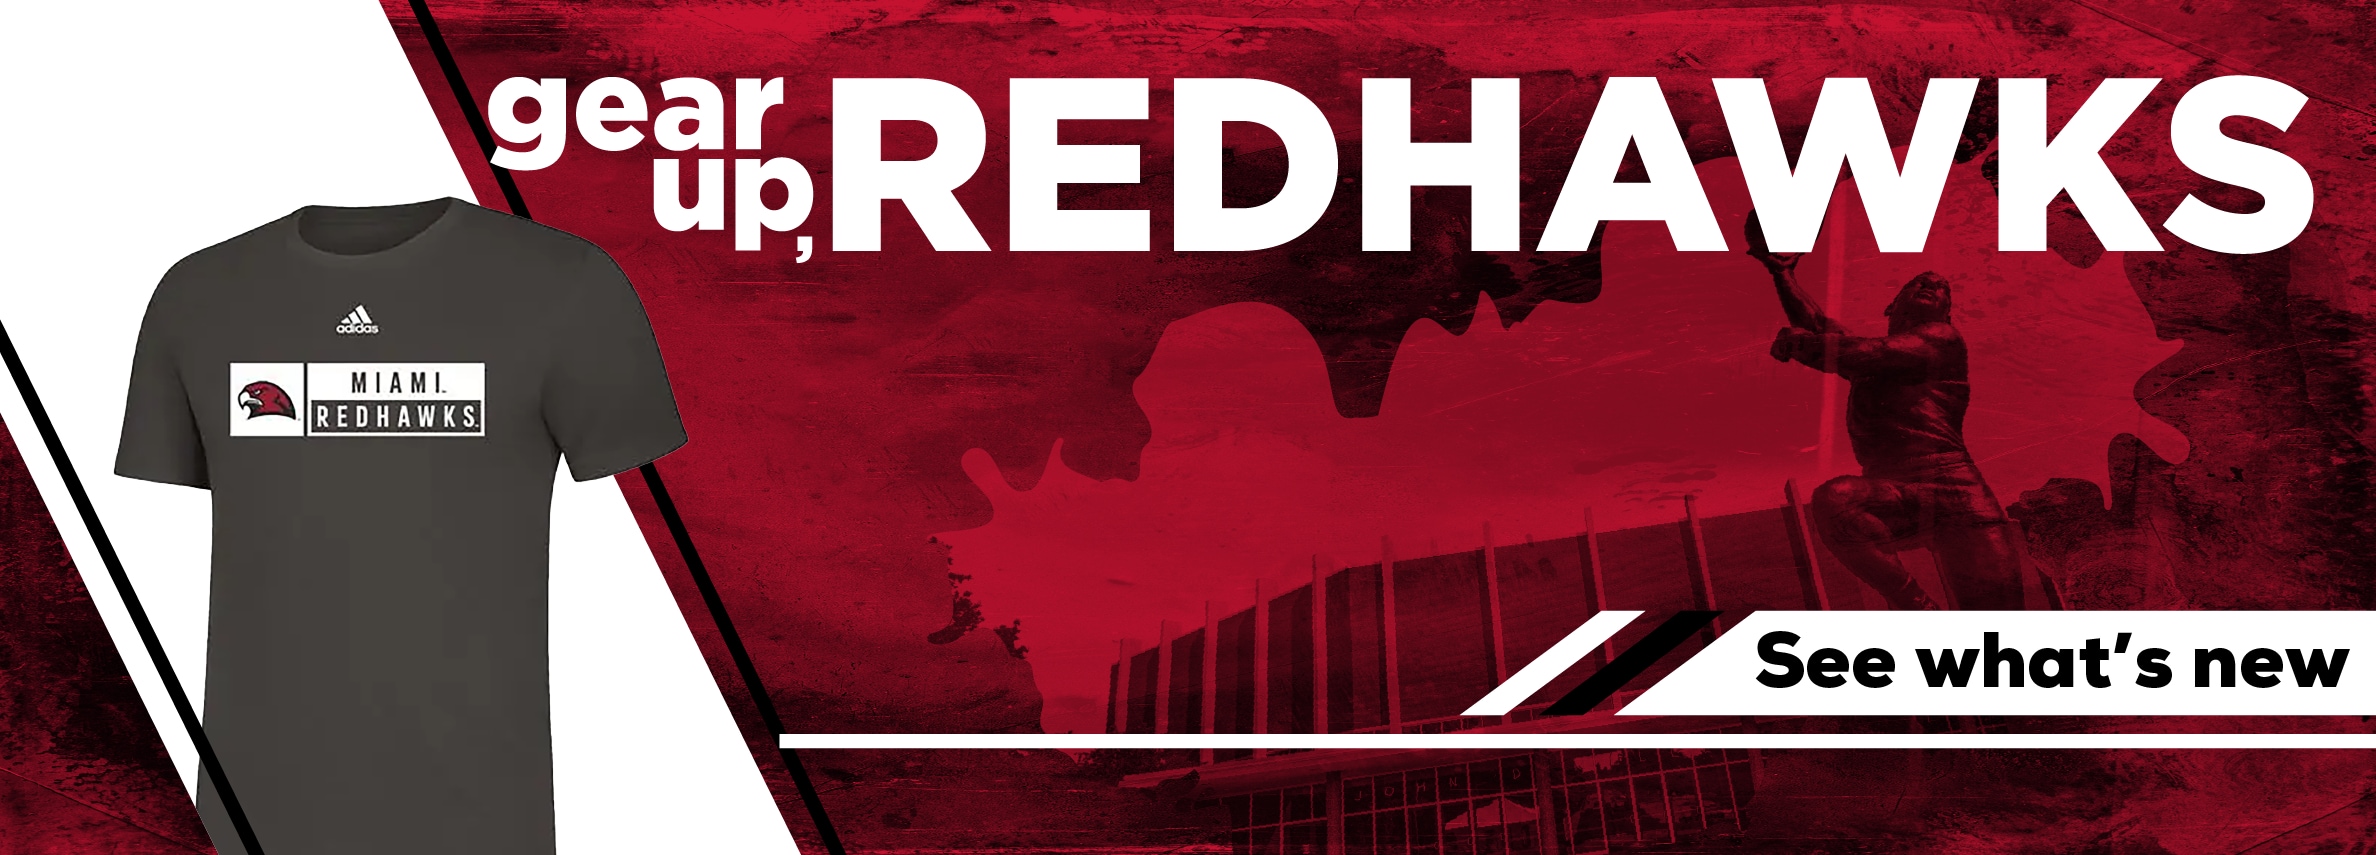 Gear up, Redhawks. See what's new